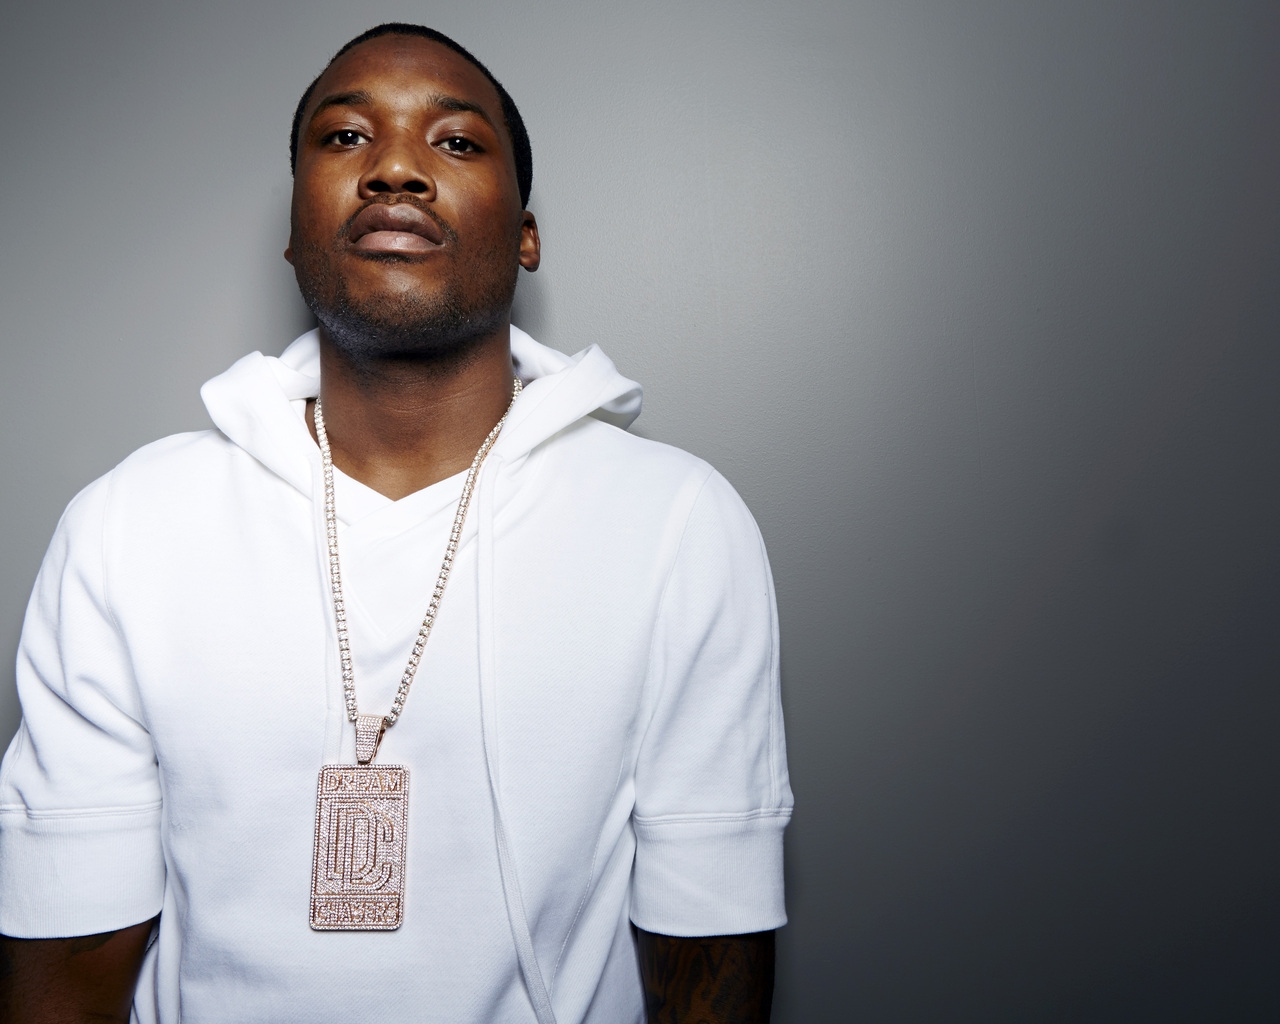 Meek Mill Look for 1280 x 1024 resolution